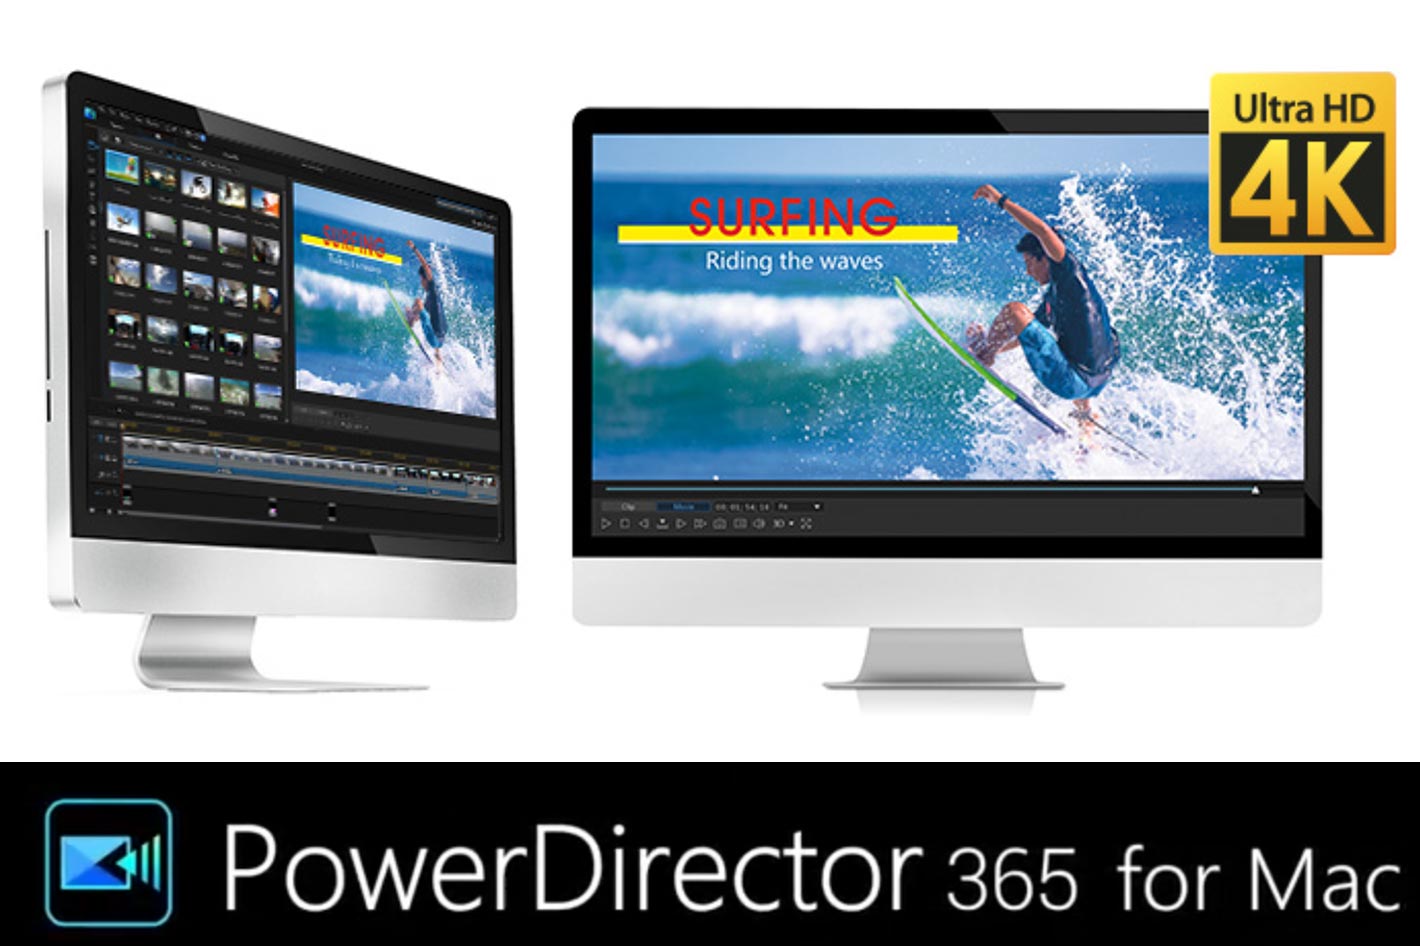 PowerDirector 365 now available for macOS